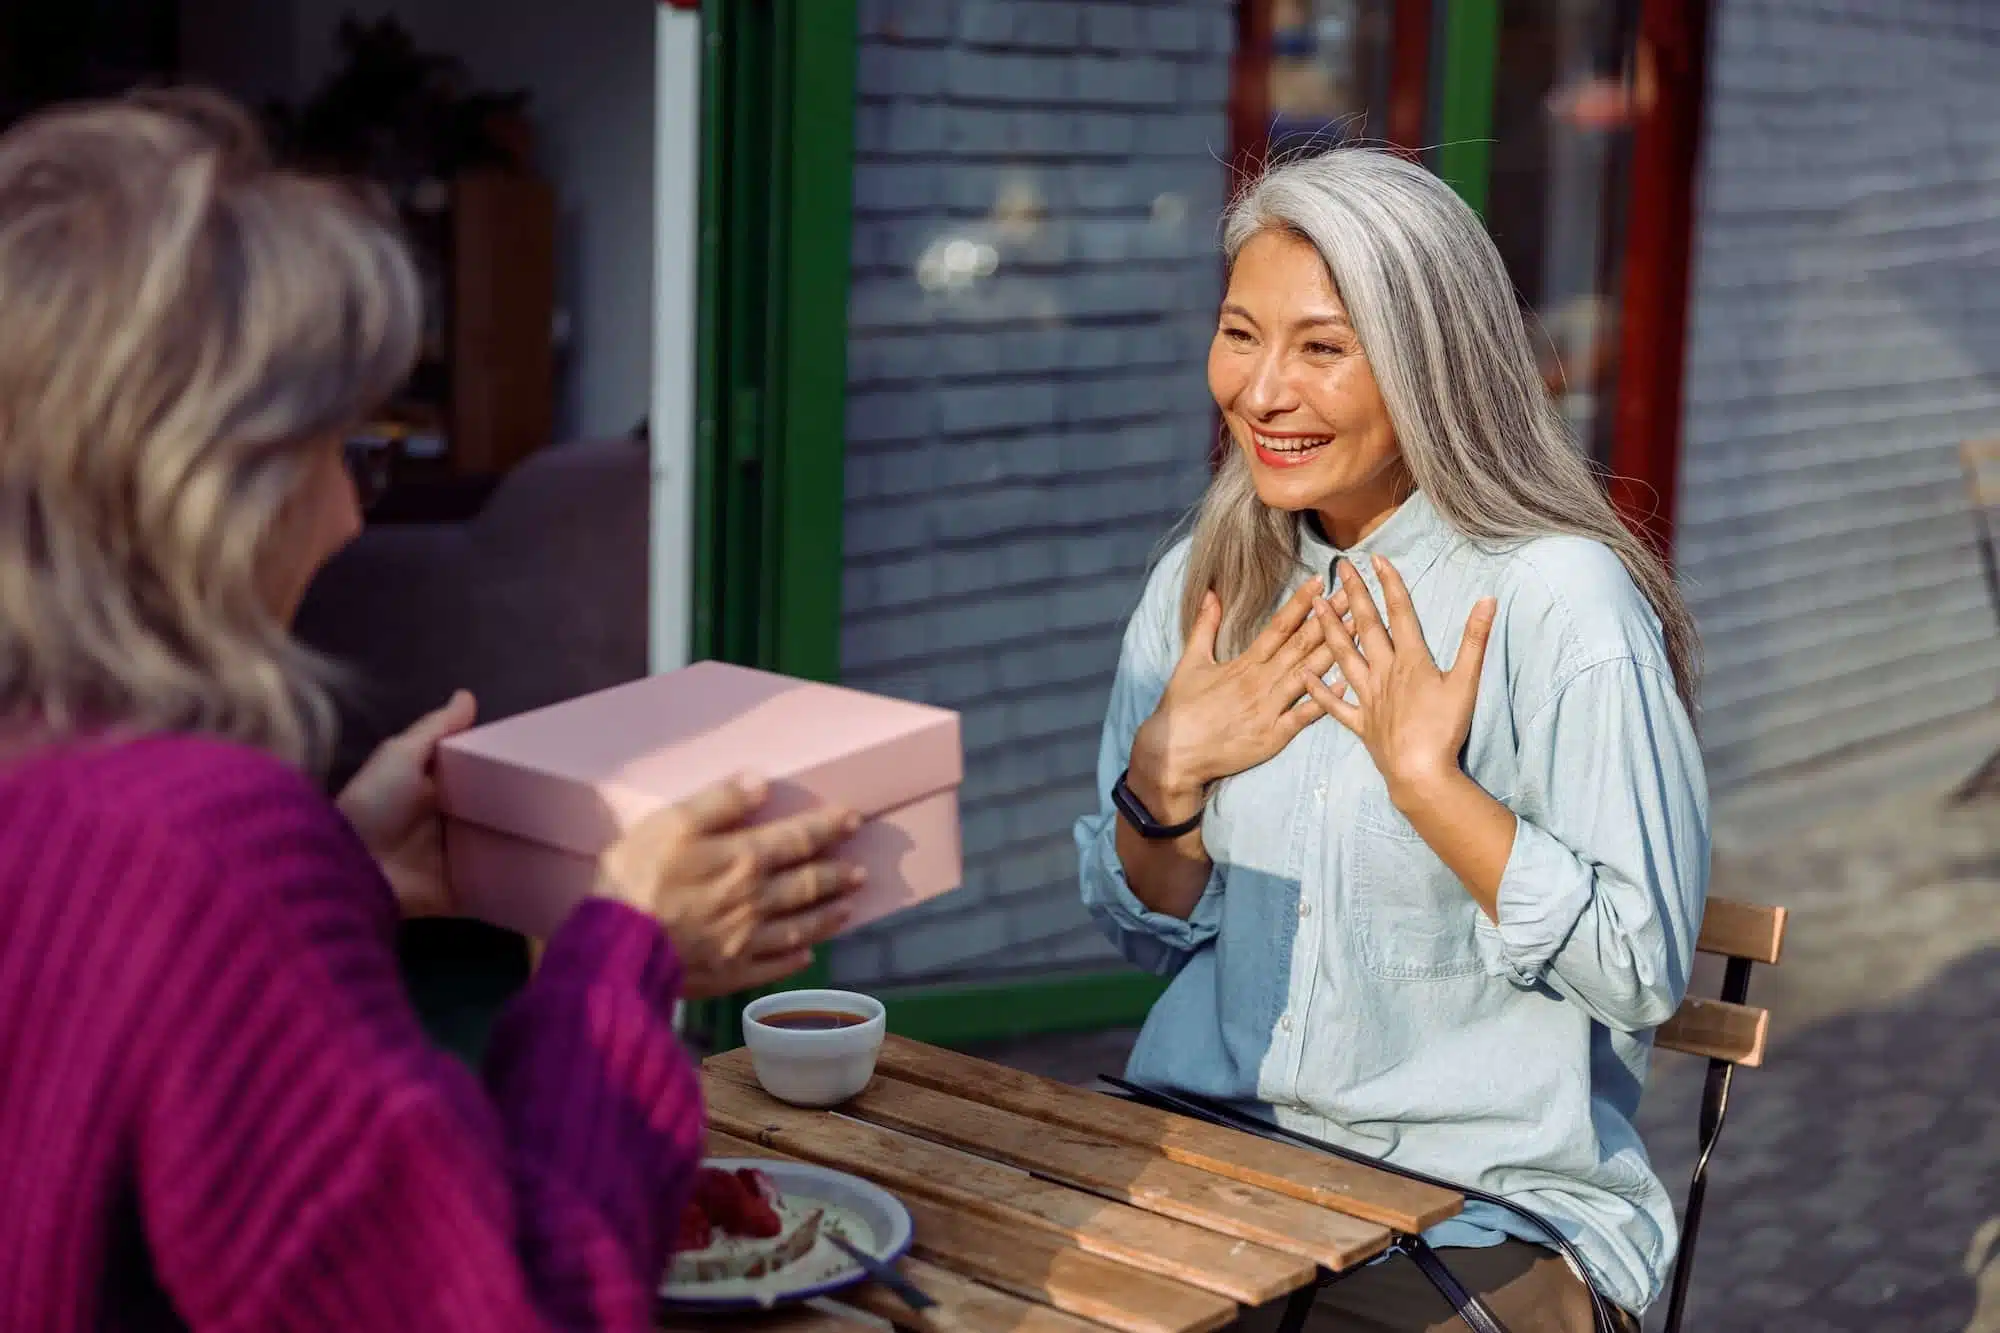 Mature friend gives present to emotional Asian woman sitting at small table in cafe